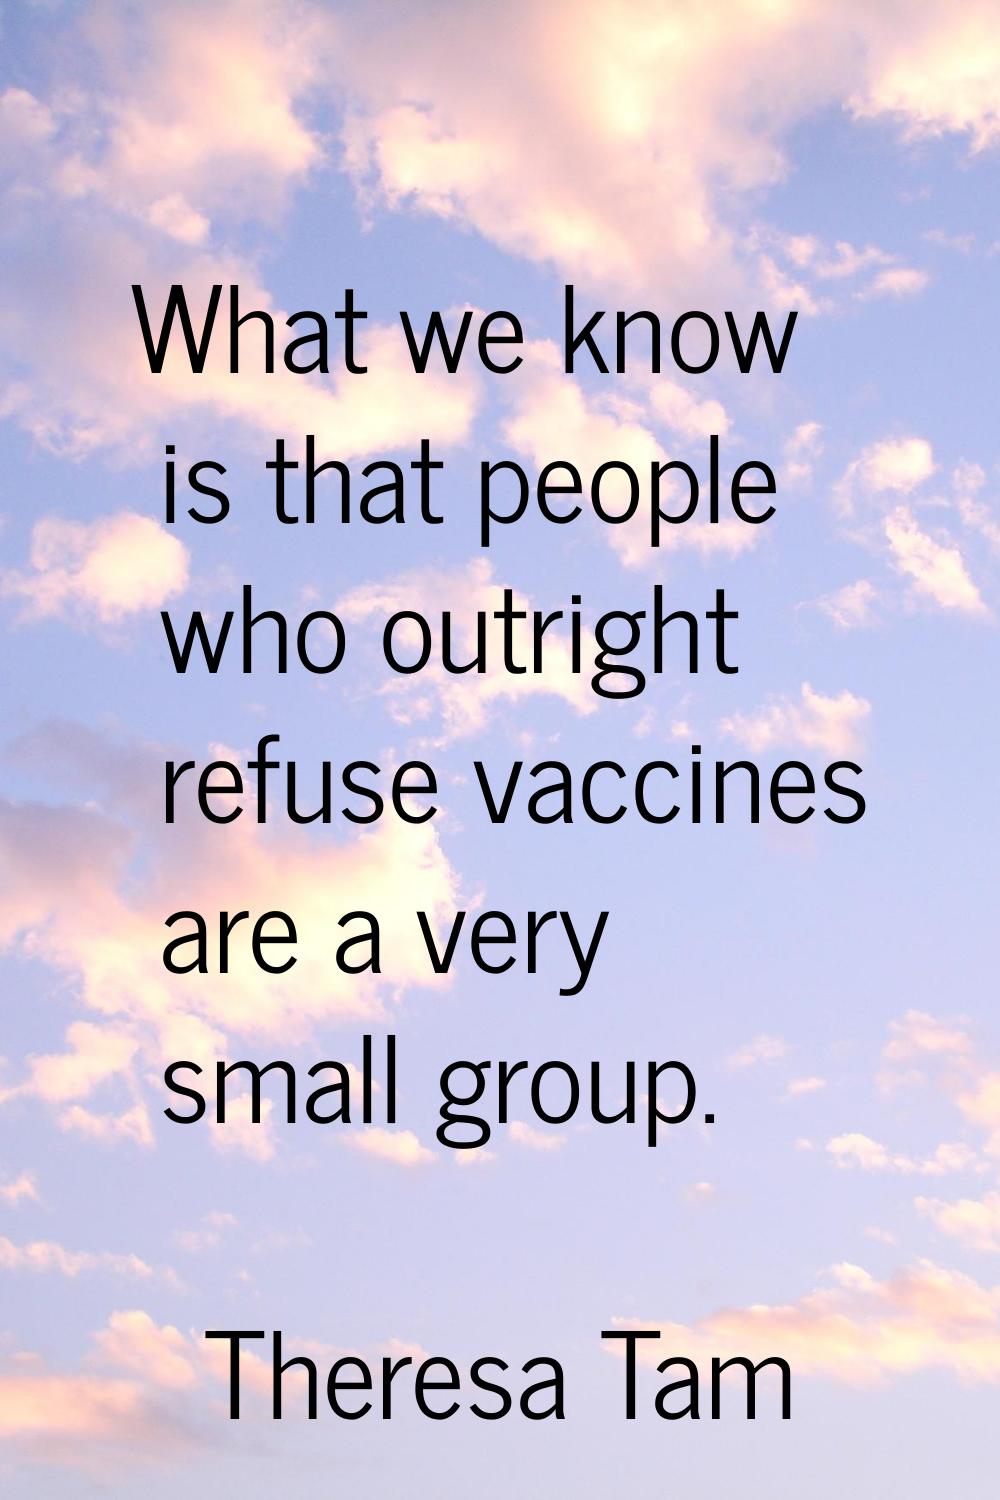 What we know is that people who outright refuse vaccines are a very small group.